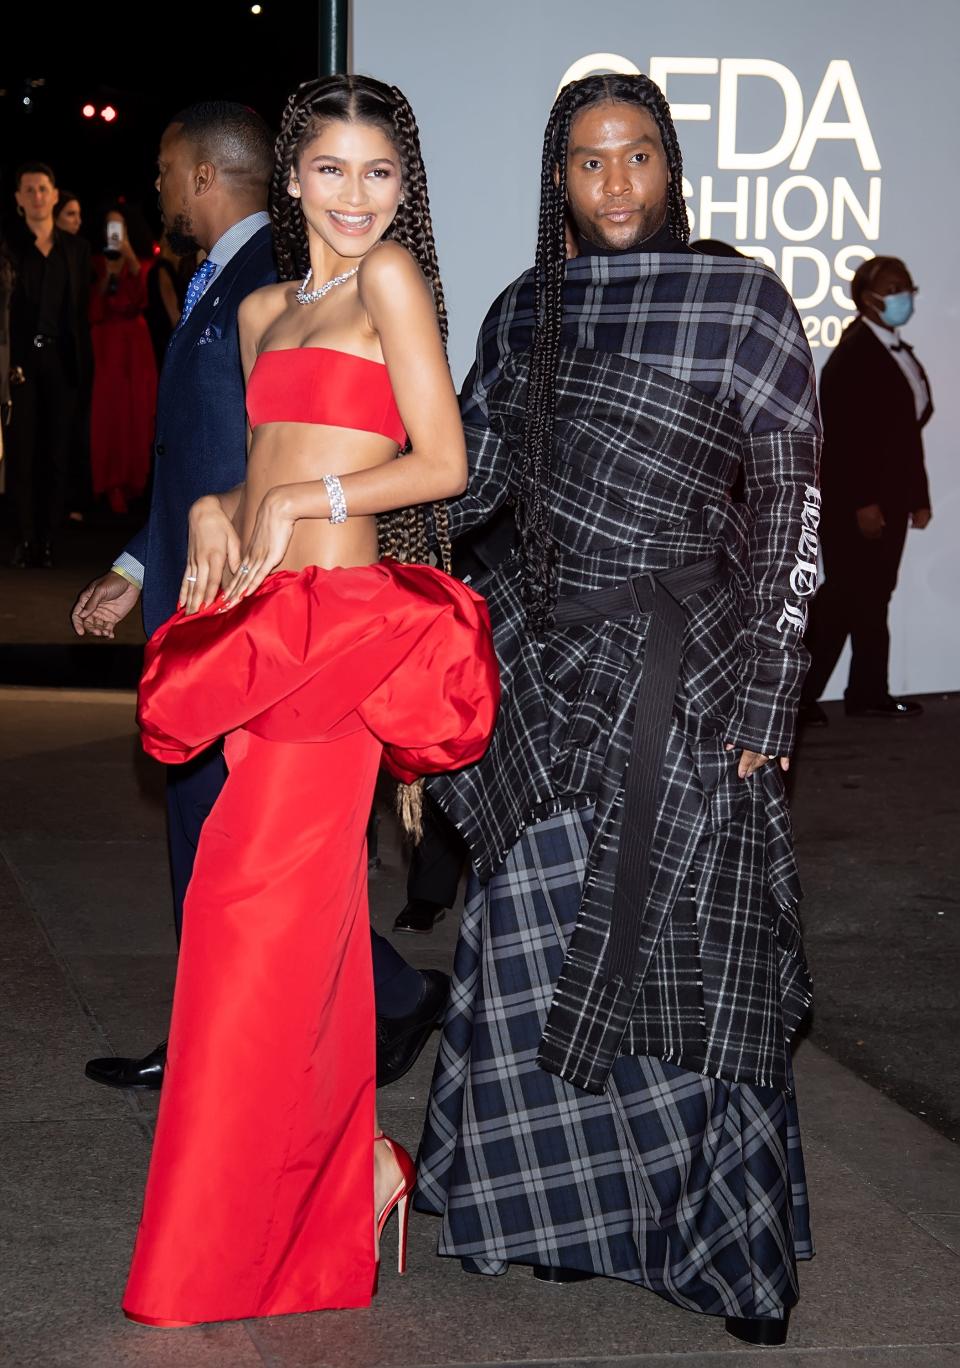 Zendaya (left) and Law Roach (right)